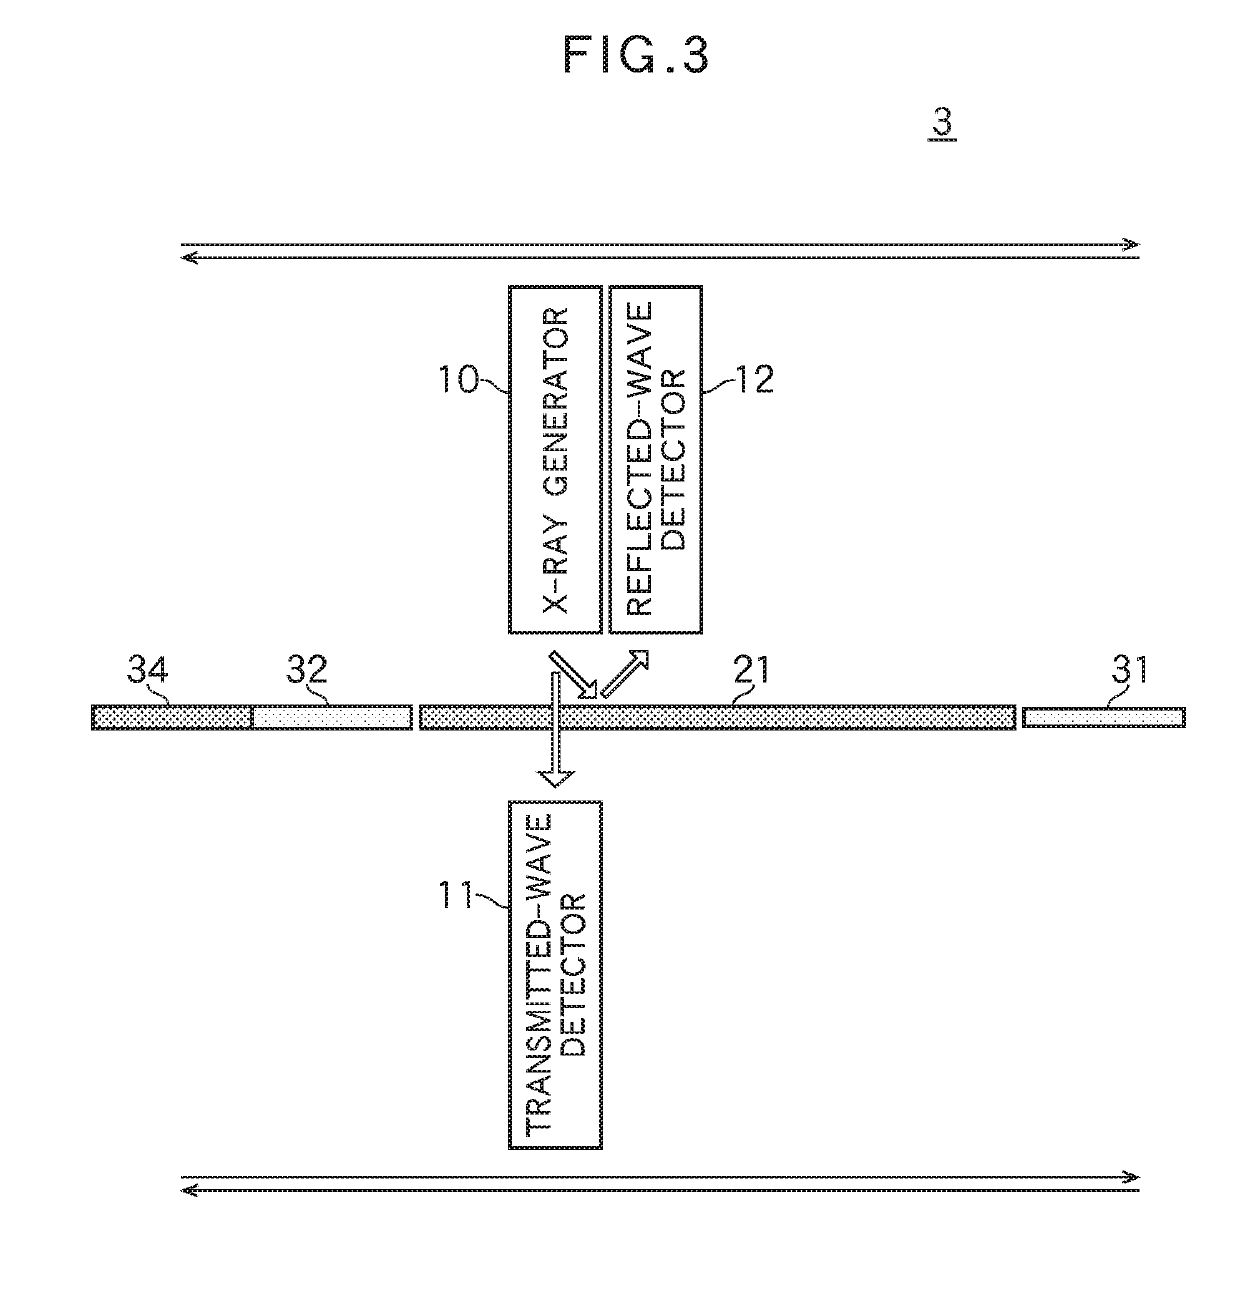 X-ray utilized compound measuring apparatus